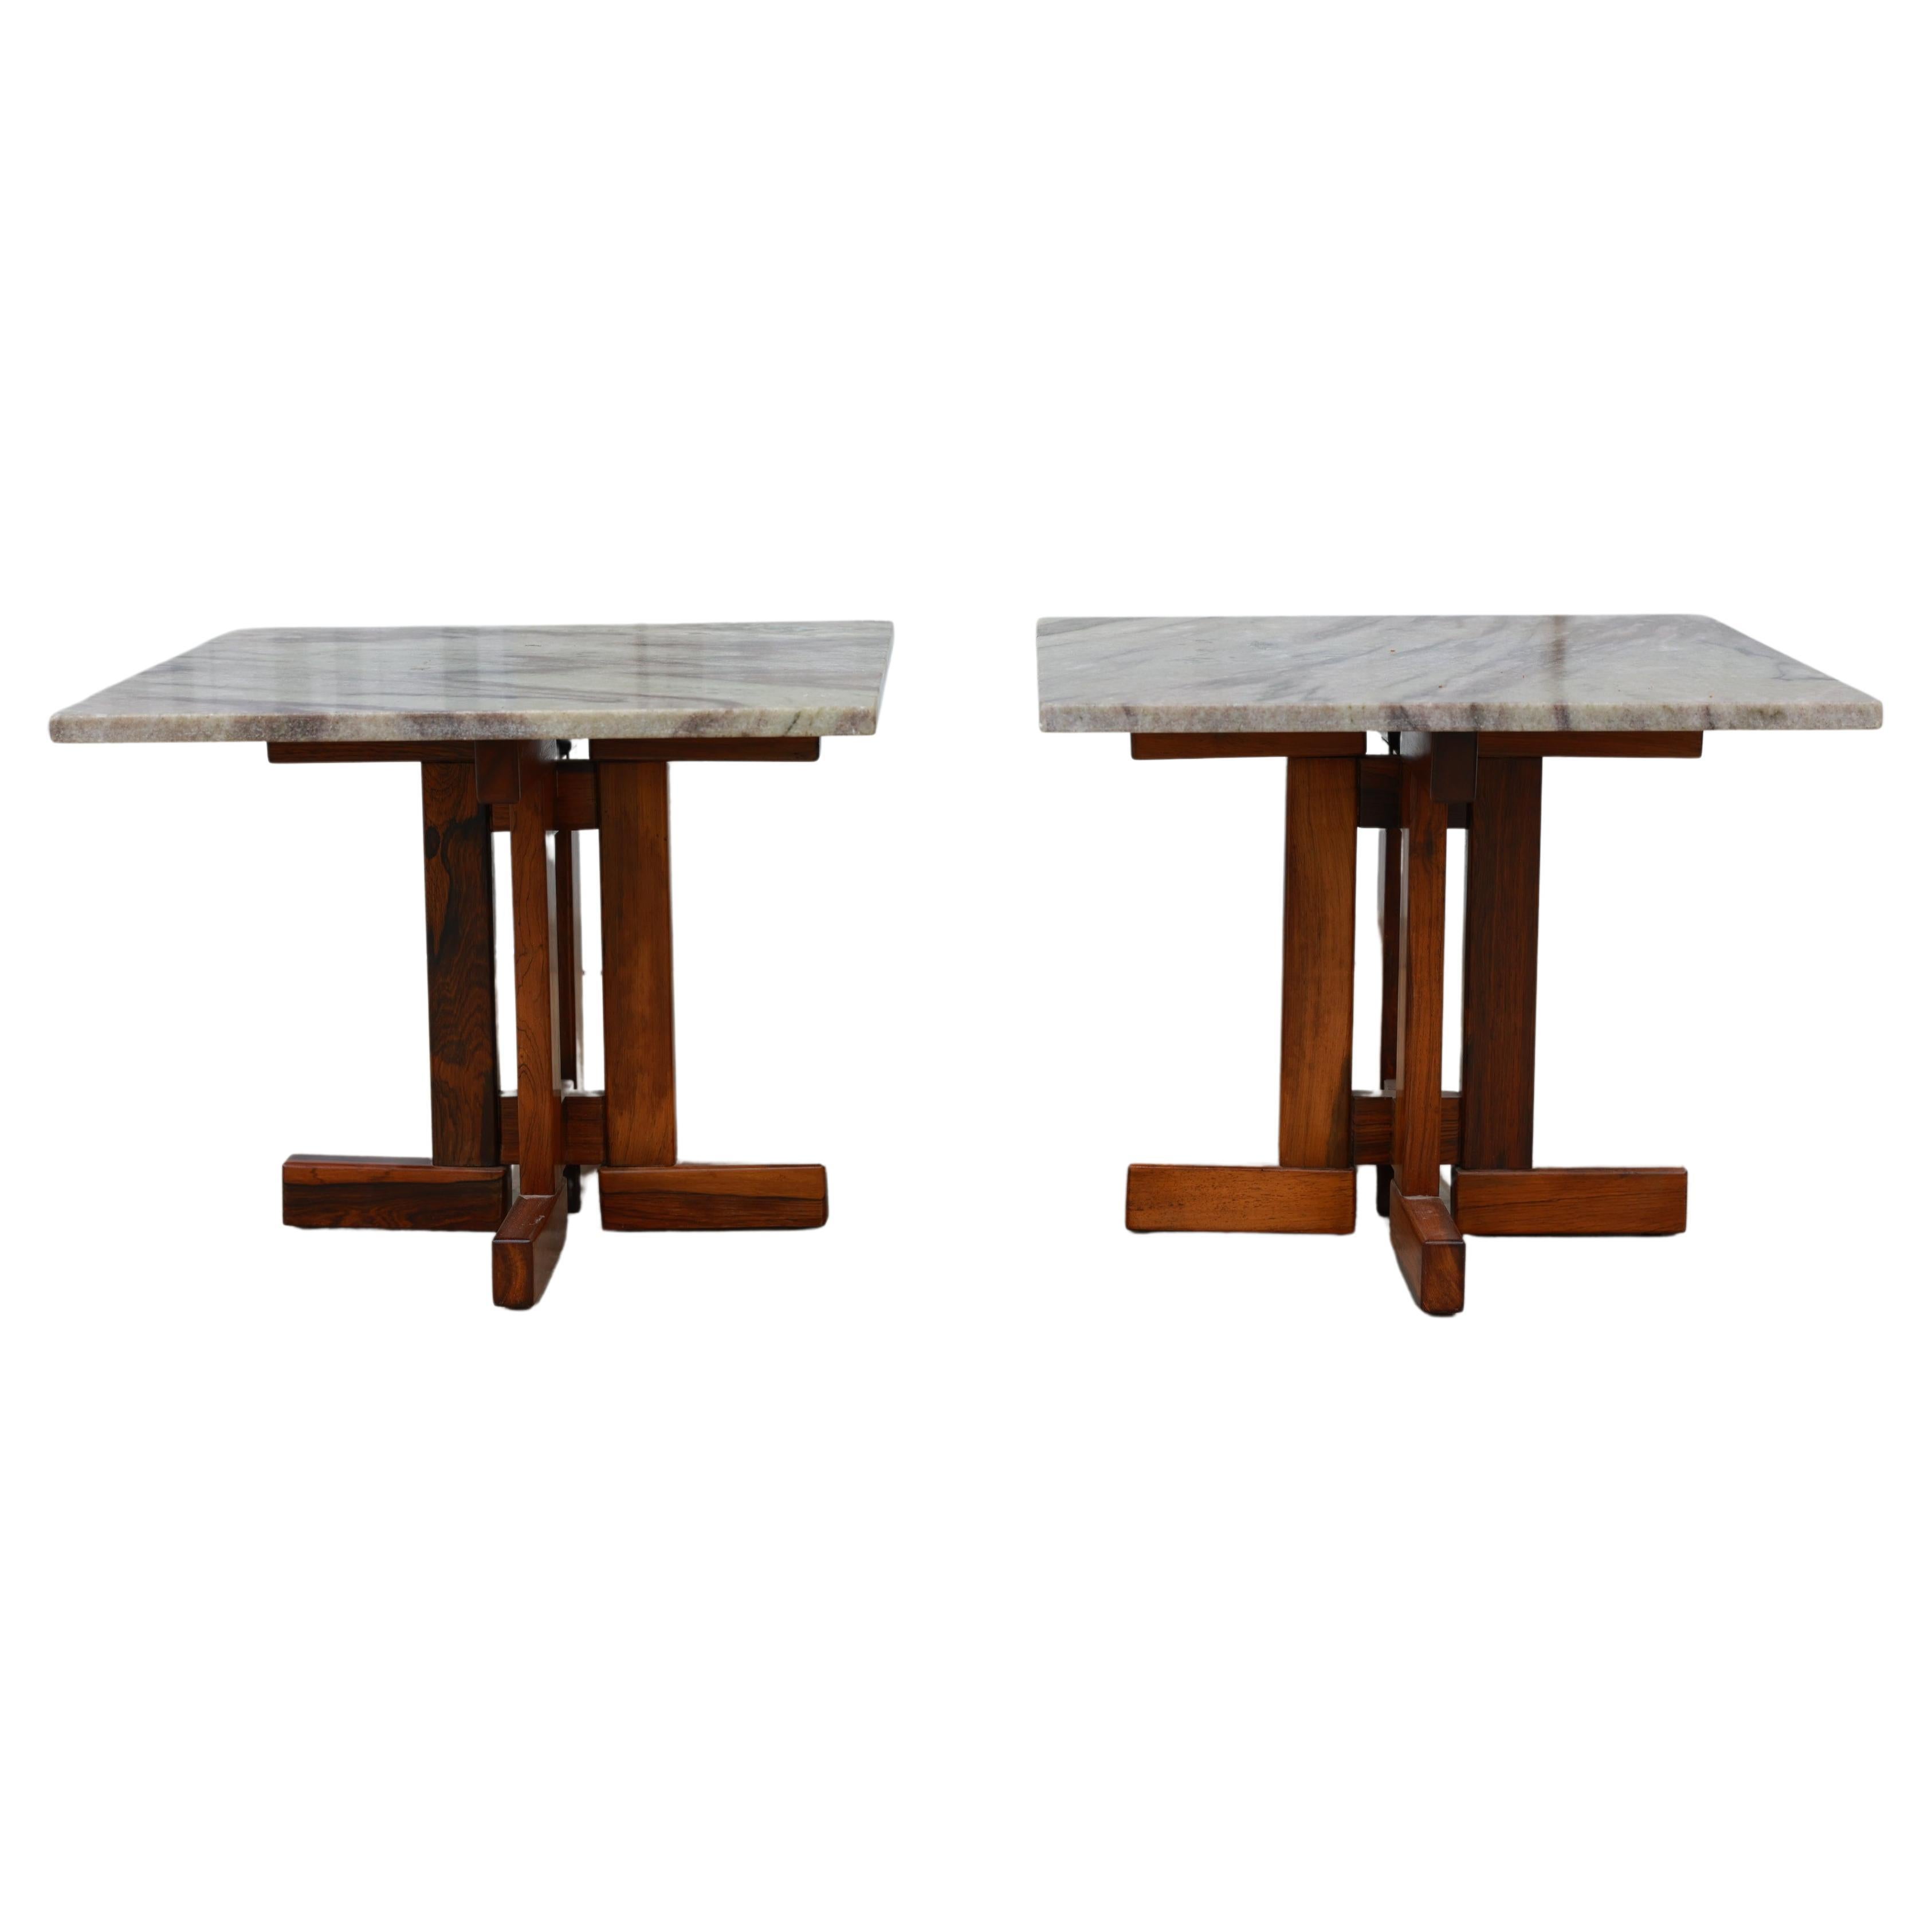 Available today in NYC with free domestic shipping included these Brazilian Modern Pair of Side Tables in Rosewood and Granite by Celina are nothing less than spectacular!

These side tables showcase a blend of Brazilian rosewood and a luxurious